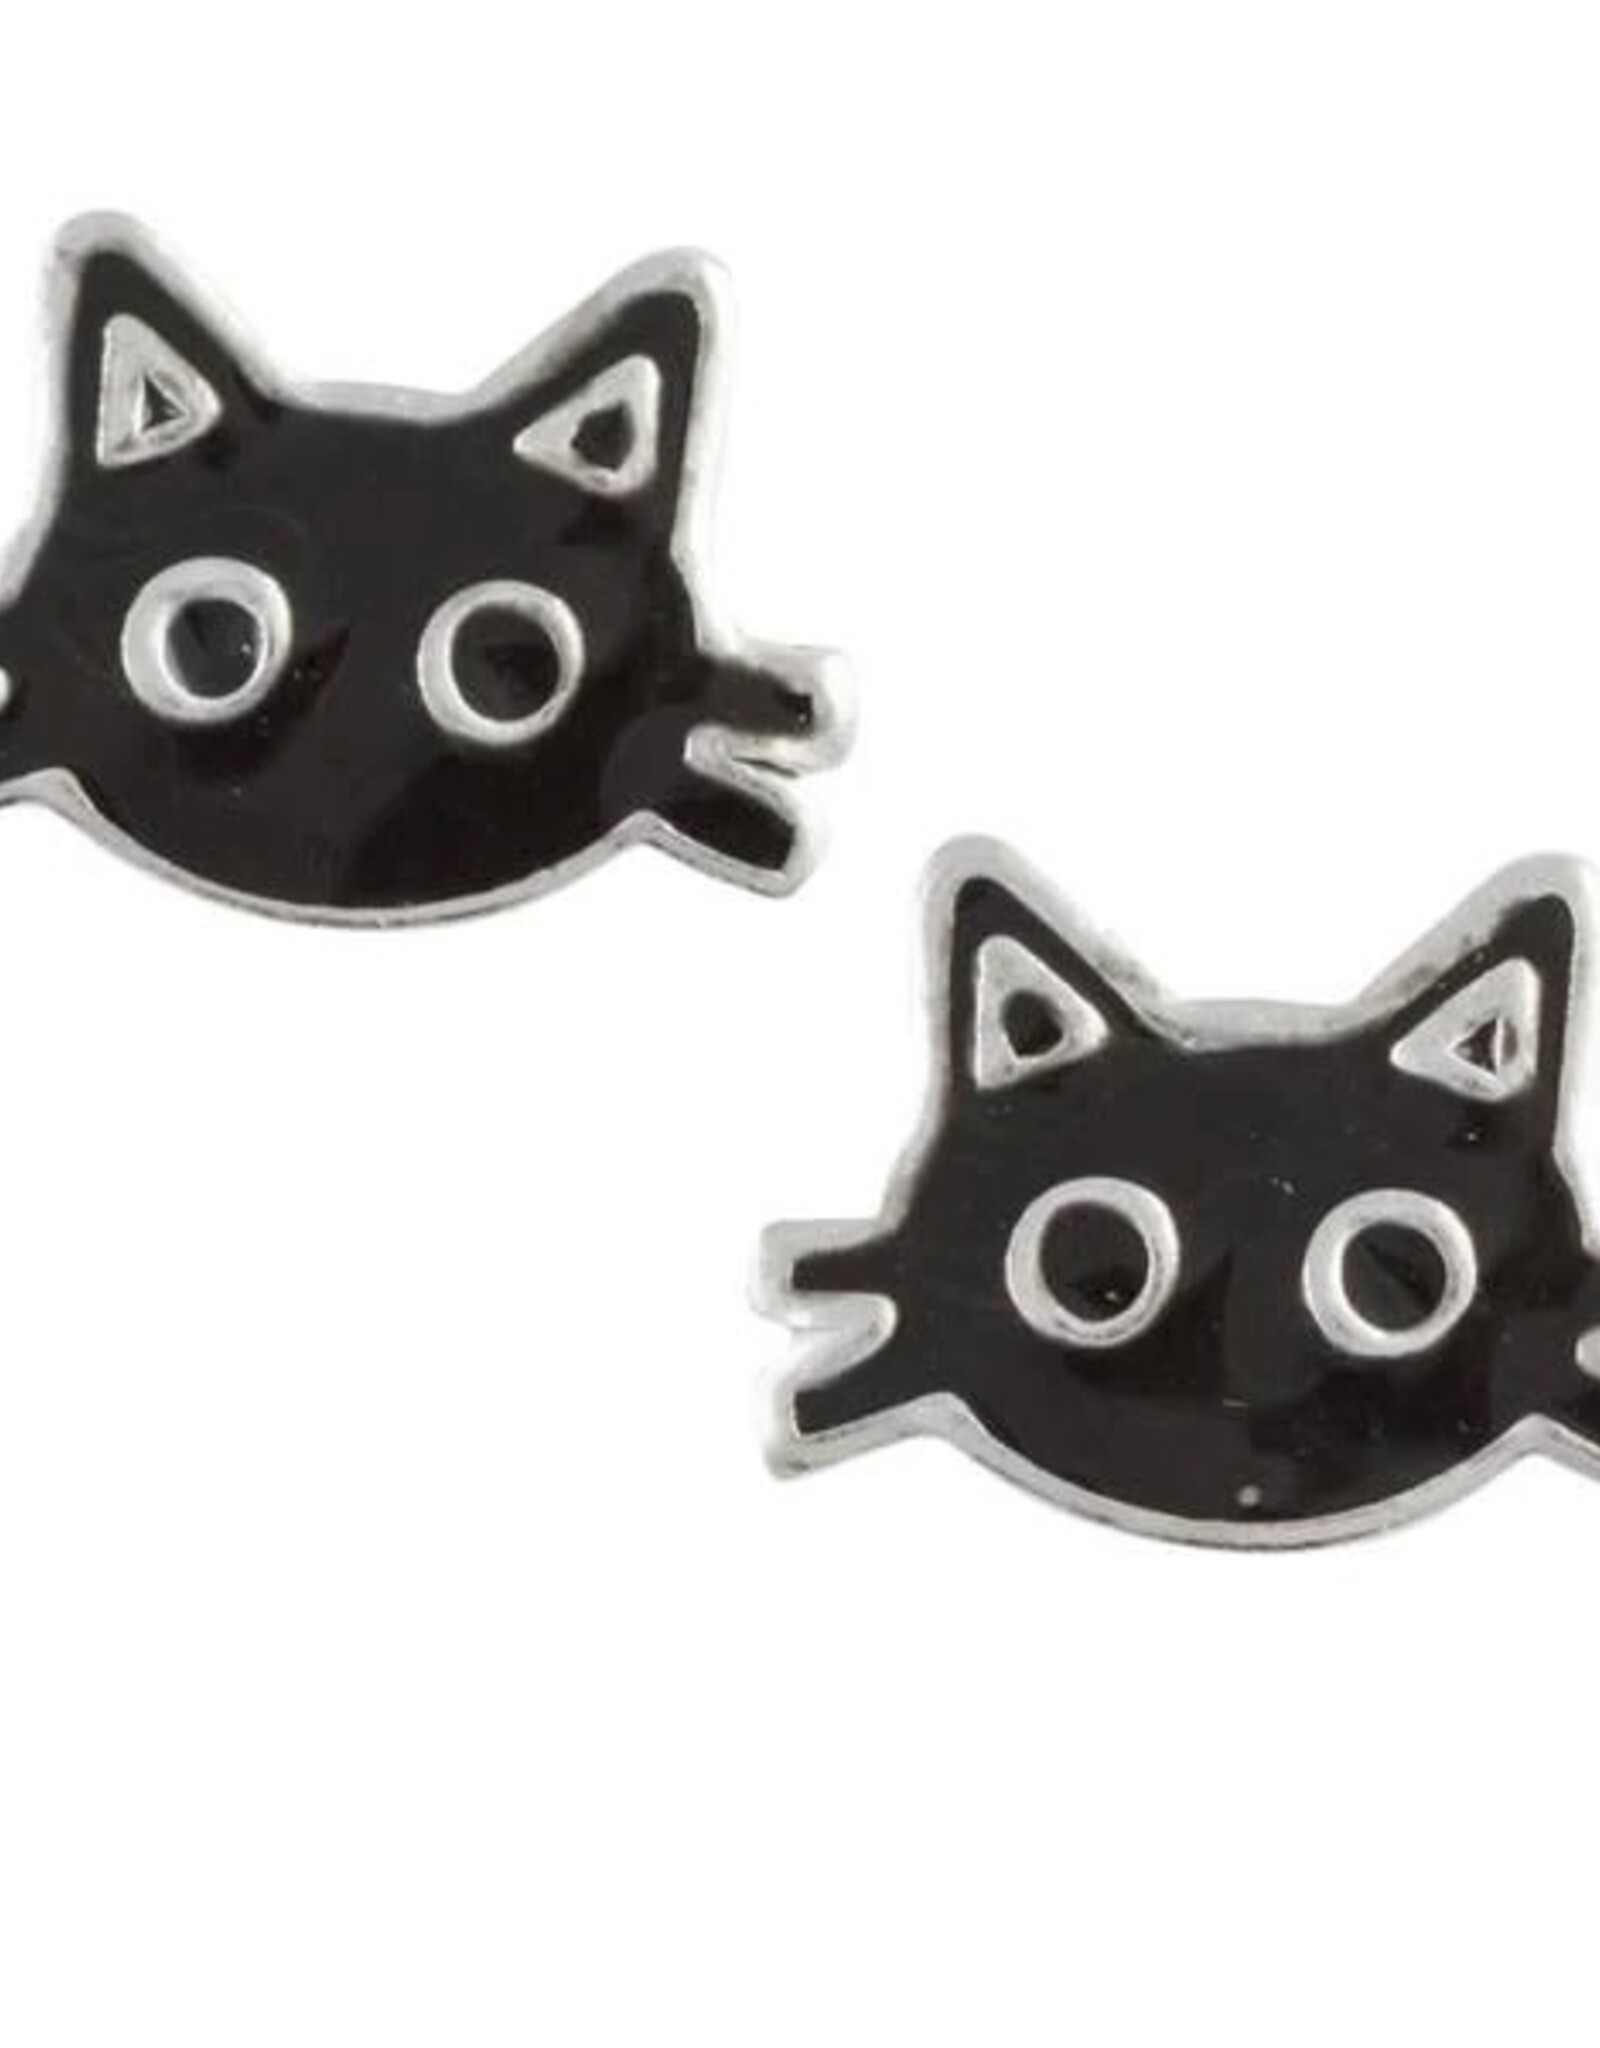 Good Collective BLACK KITTY CAT FACE STUD EARRING - Tomas